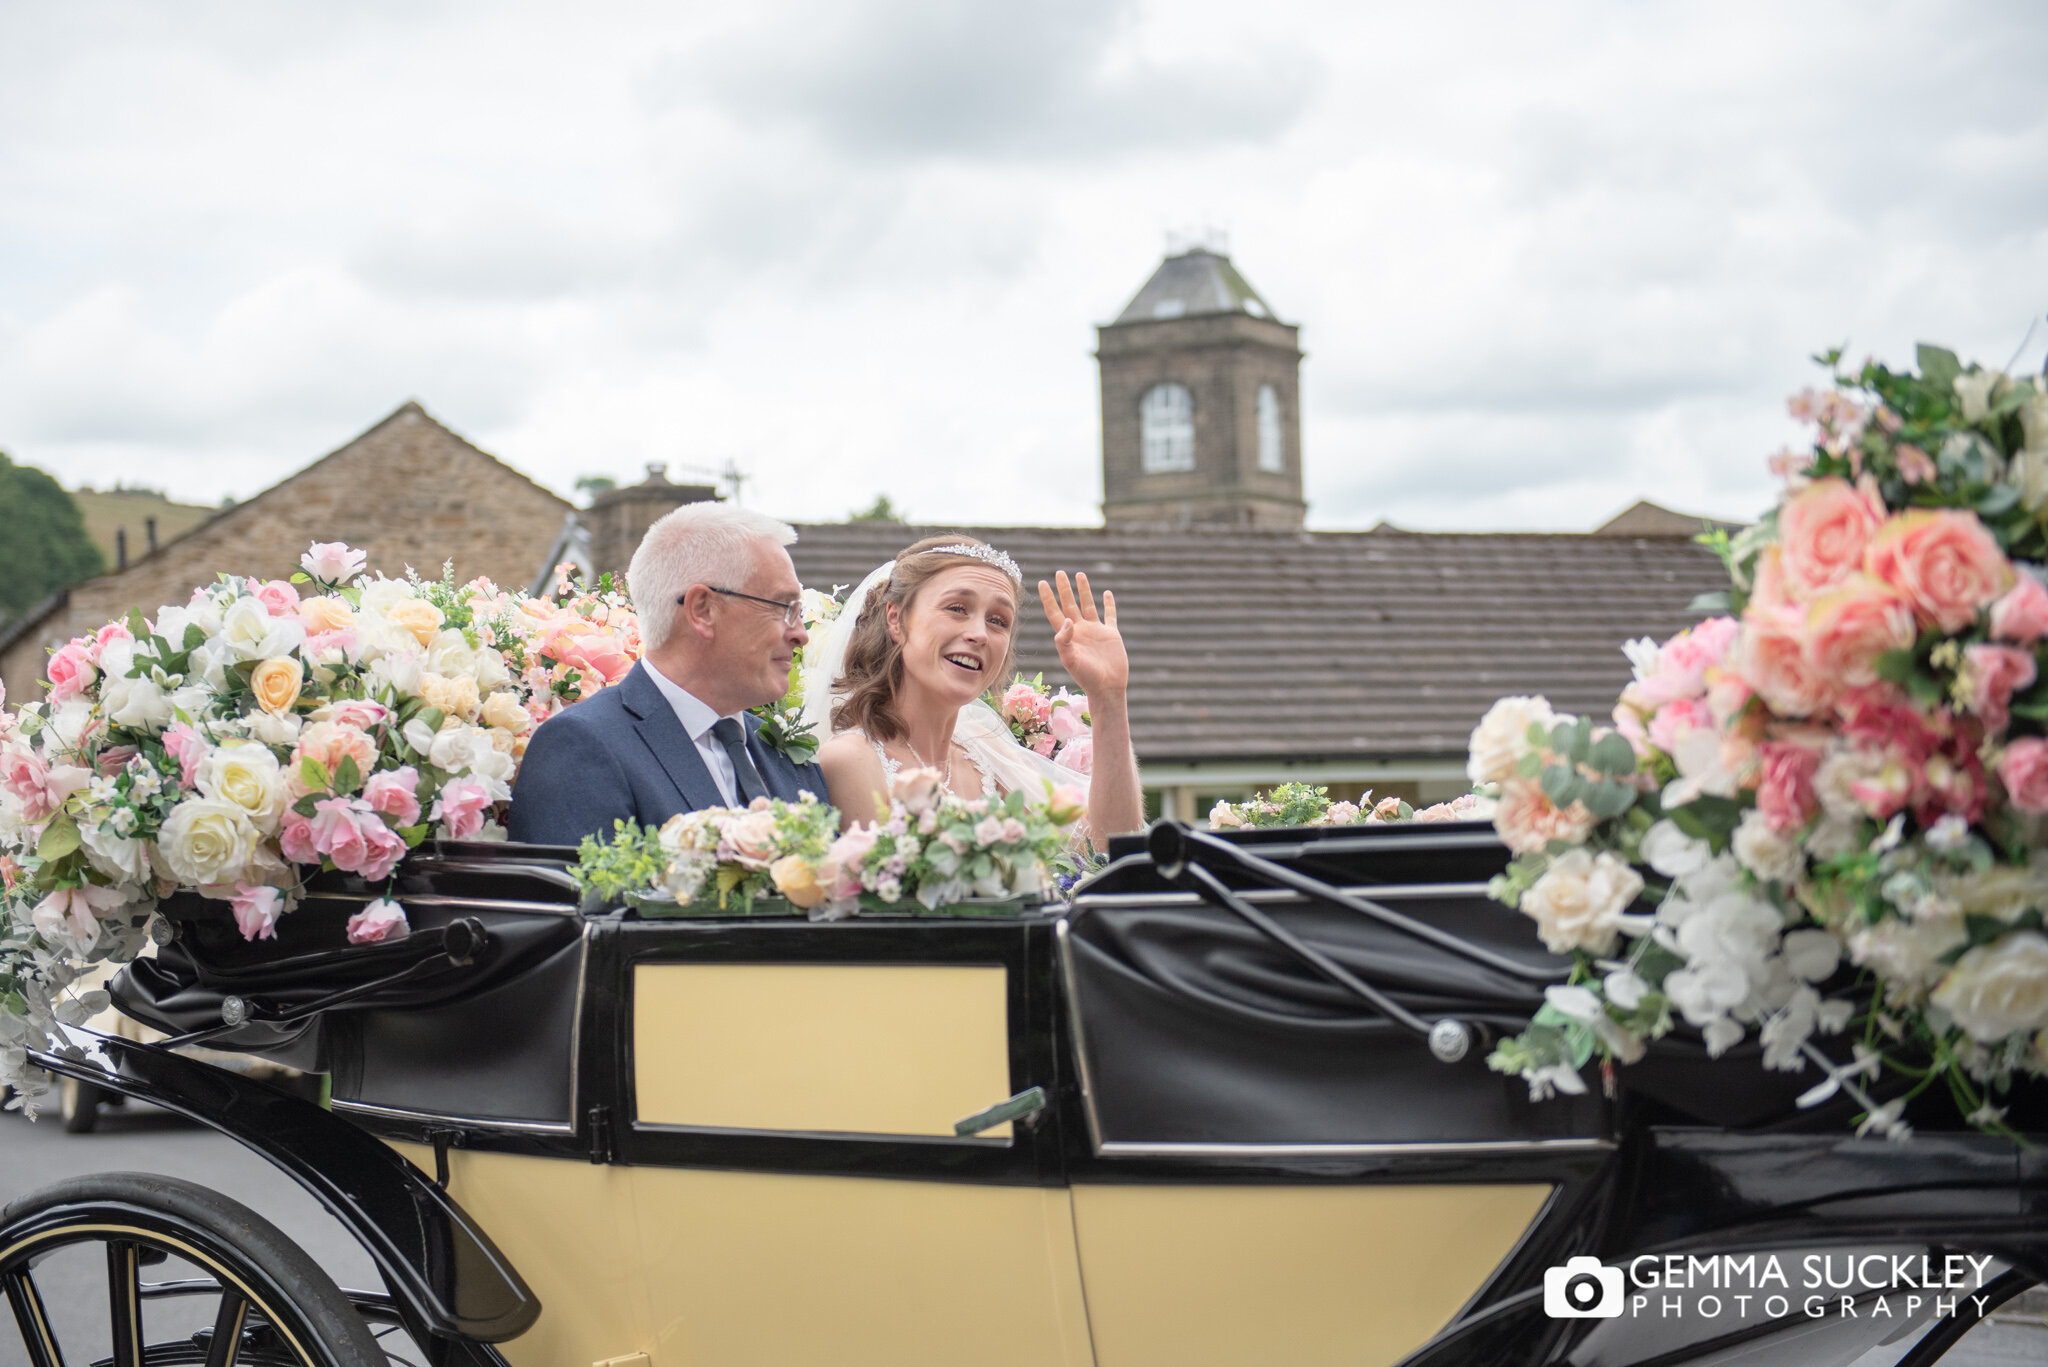 the bride and her father arriving at the church in a horse and carriage